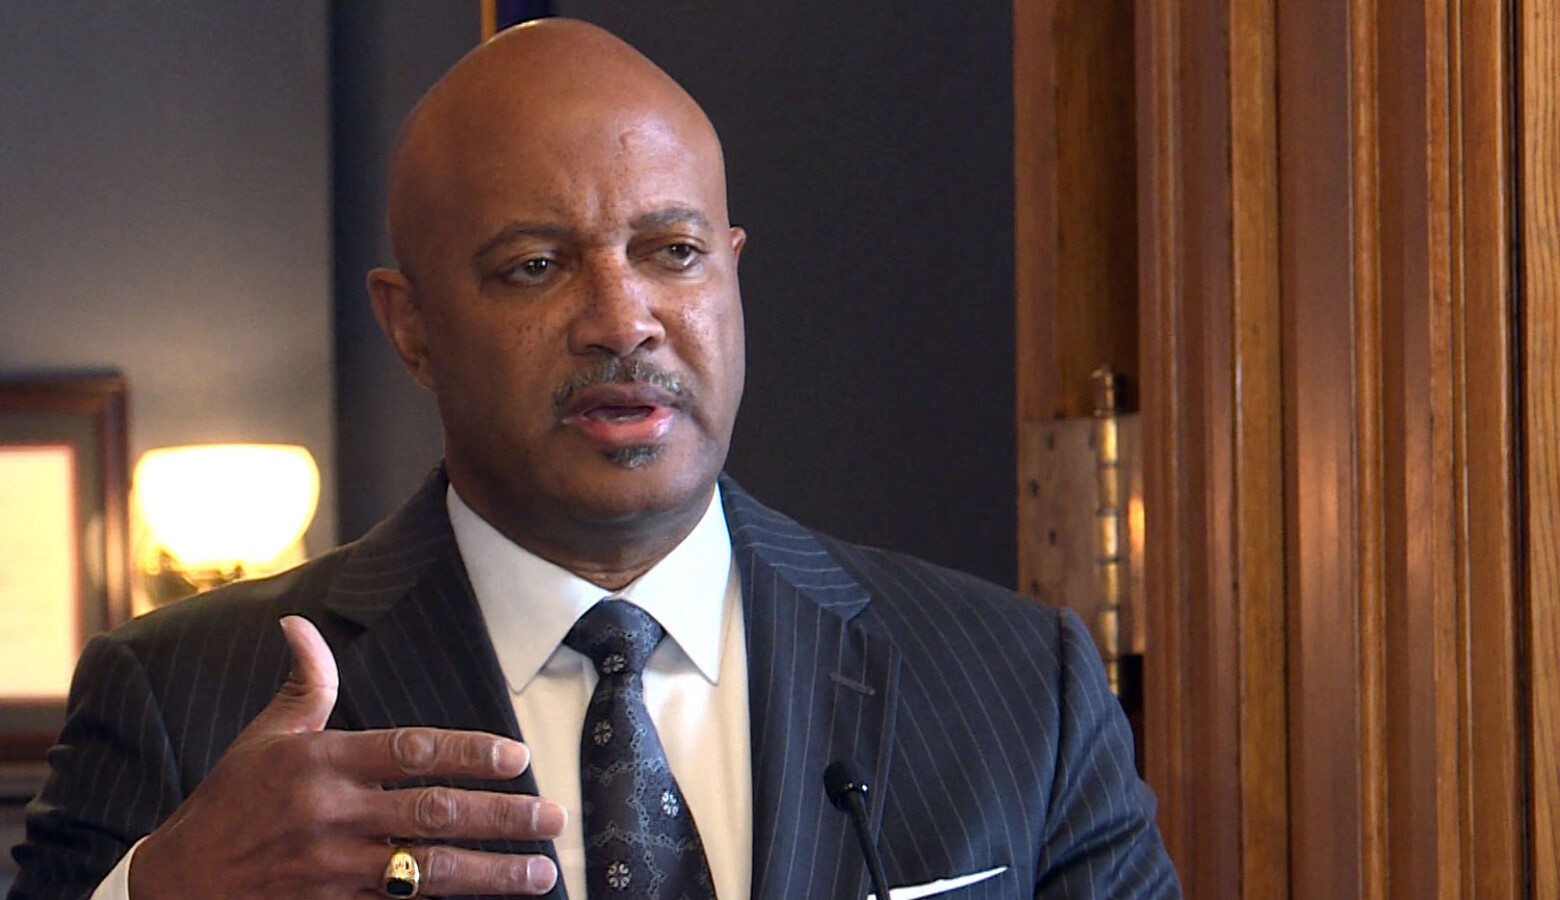 A disciplinary hearing officer says Attorney General Curtis Hill's conduct was “offense, invasive, damaging and embarrassing.” (FILE PHOTO: Lauren Chapman/IPB News)